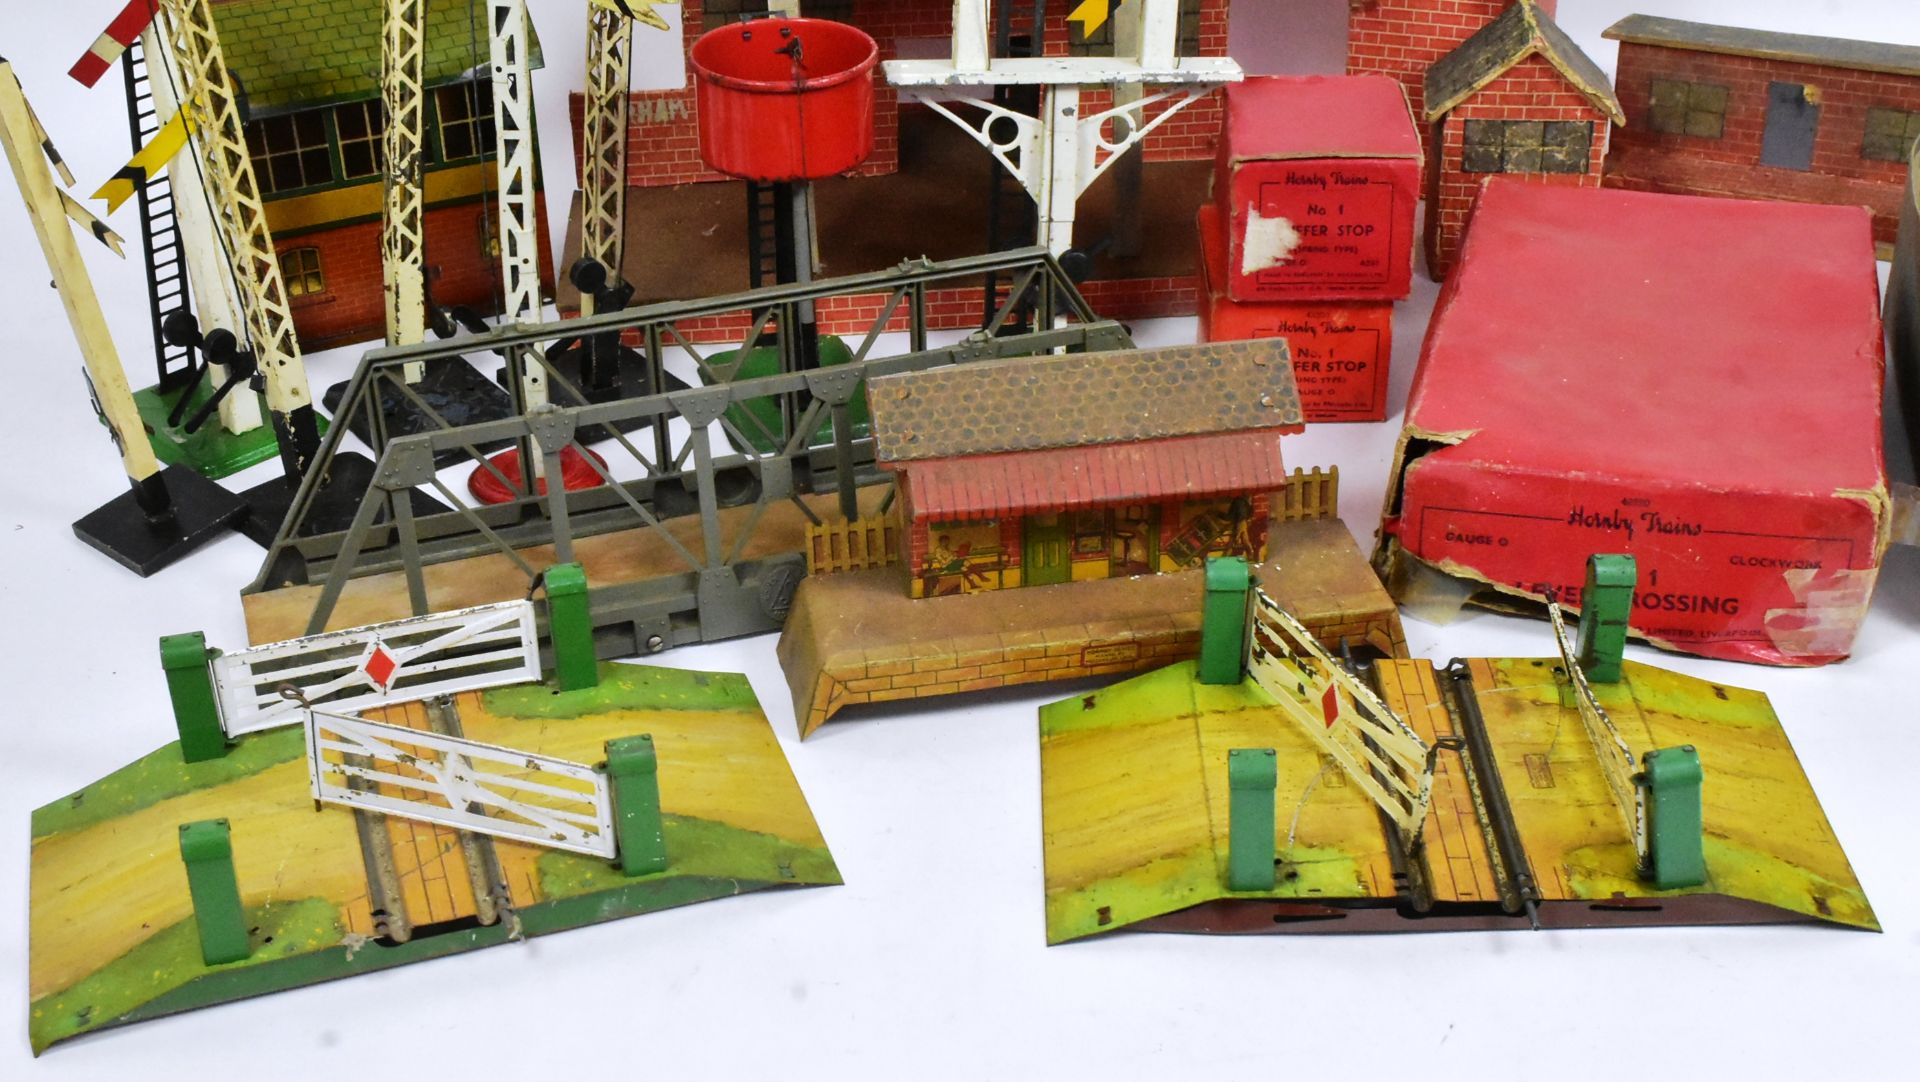 MODEL RAILWAY - COLLECTION OF VINTAGE O GAUGE TINPLATE ACCESSORIES - Image 6 of 6